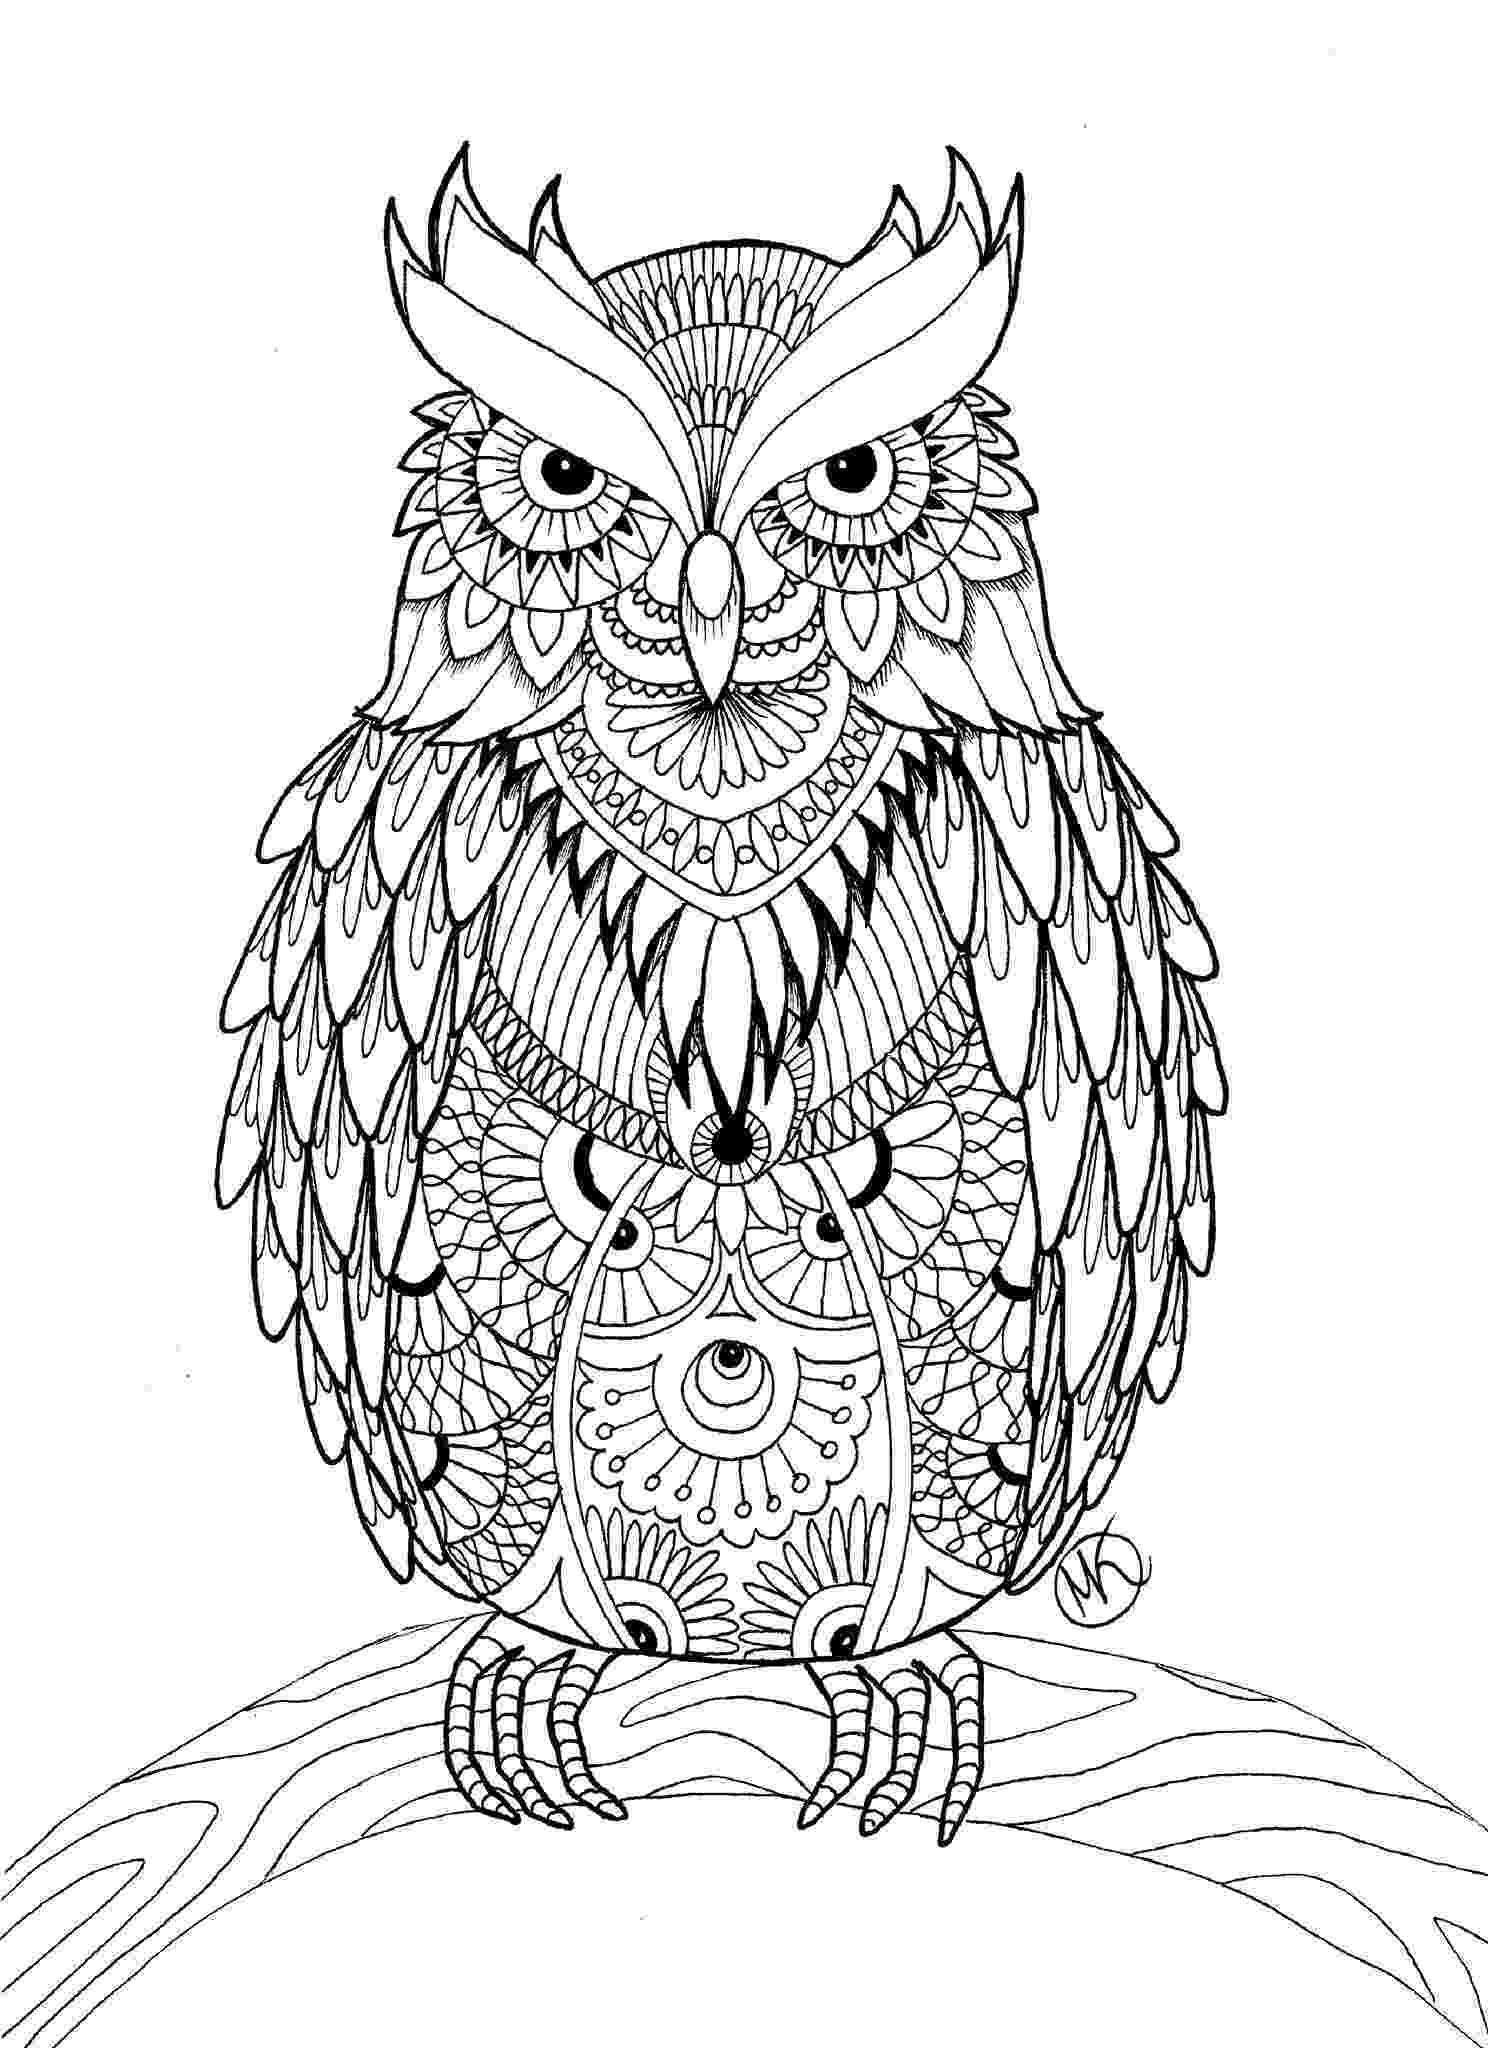 coloring pages for adults with owls de 25 bedste idéer inden for owl coloring pages på with adults owls for pages coloring 